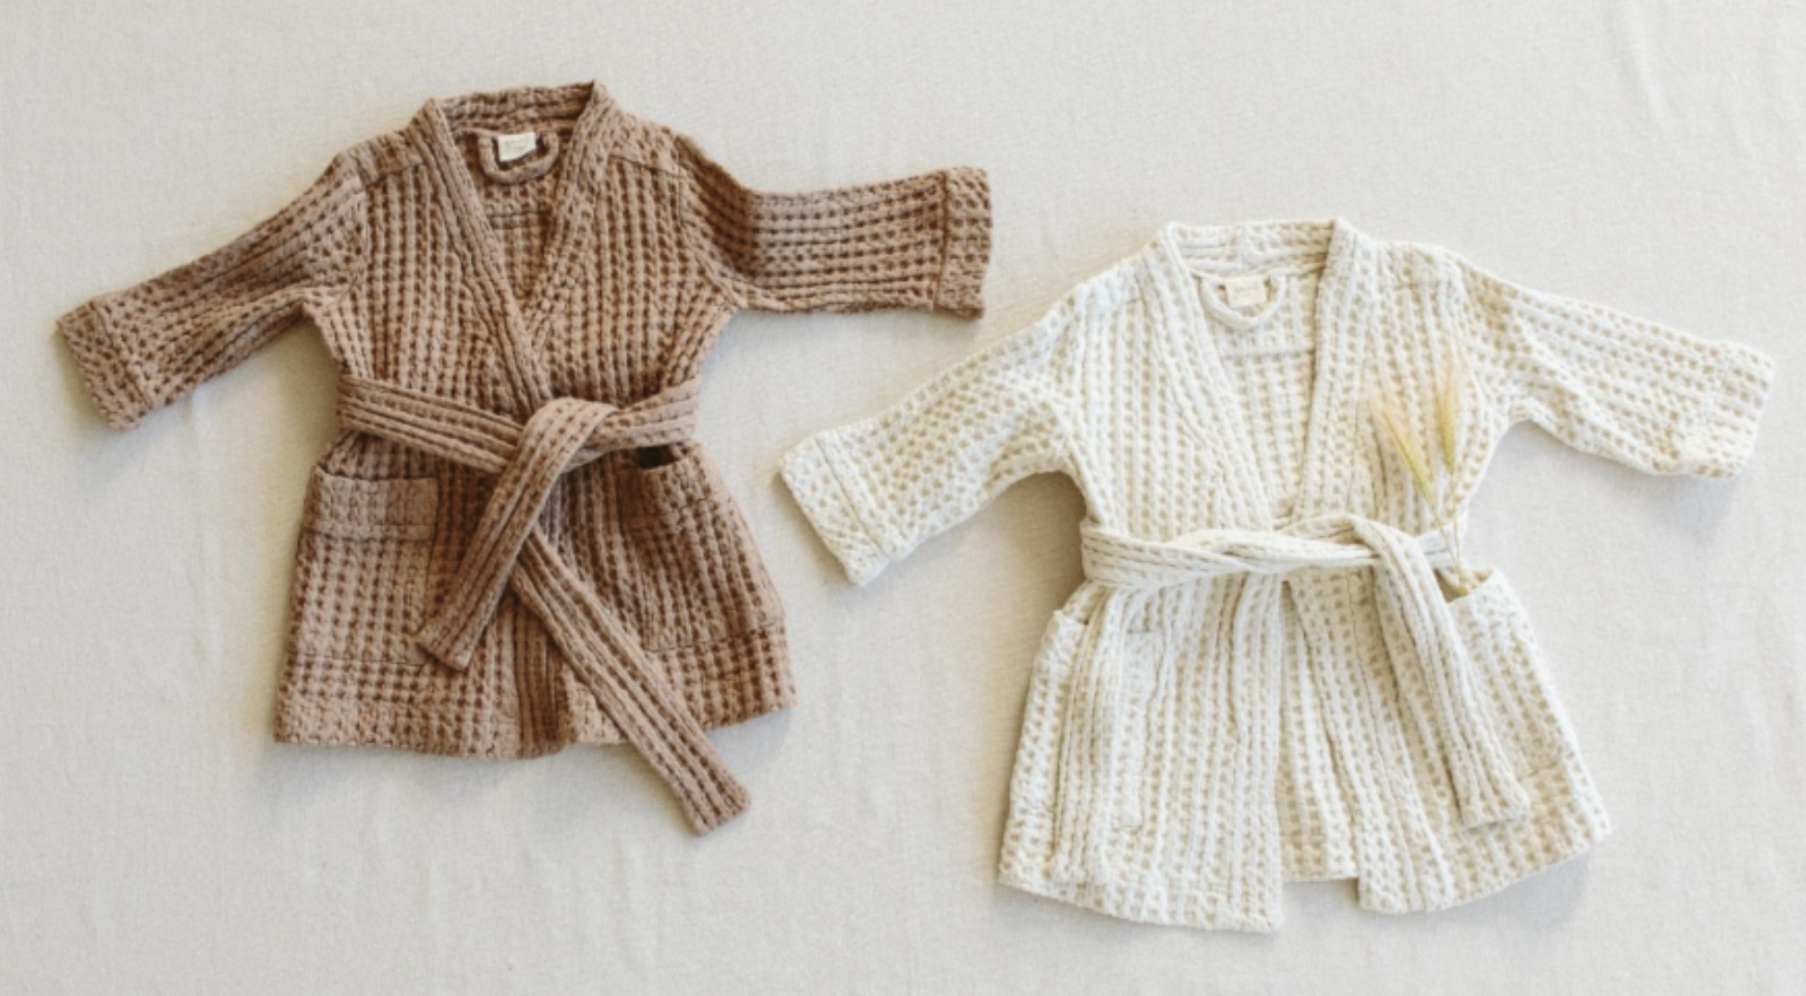 Recalled Goumi children’s robes in natural and alabaster color